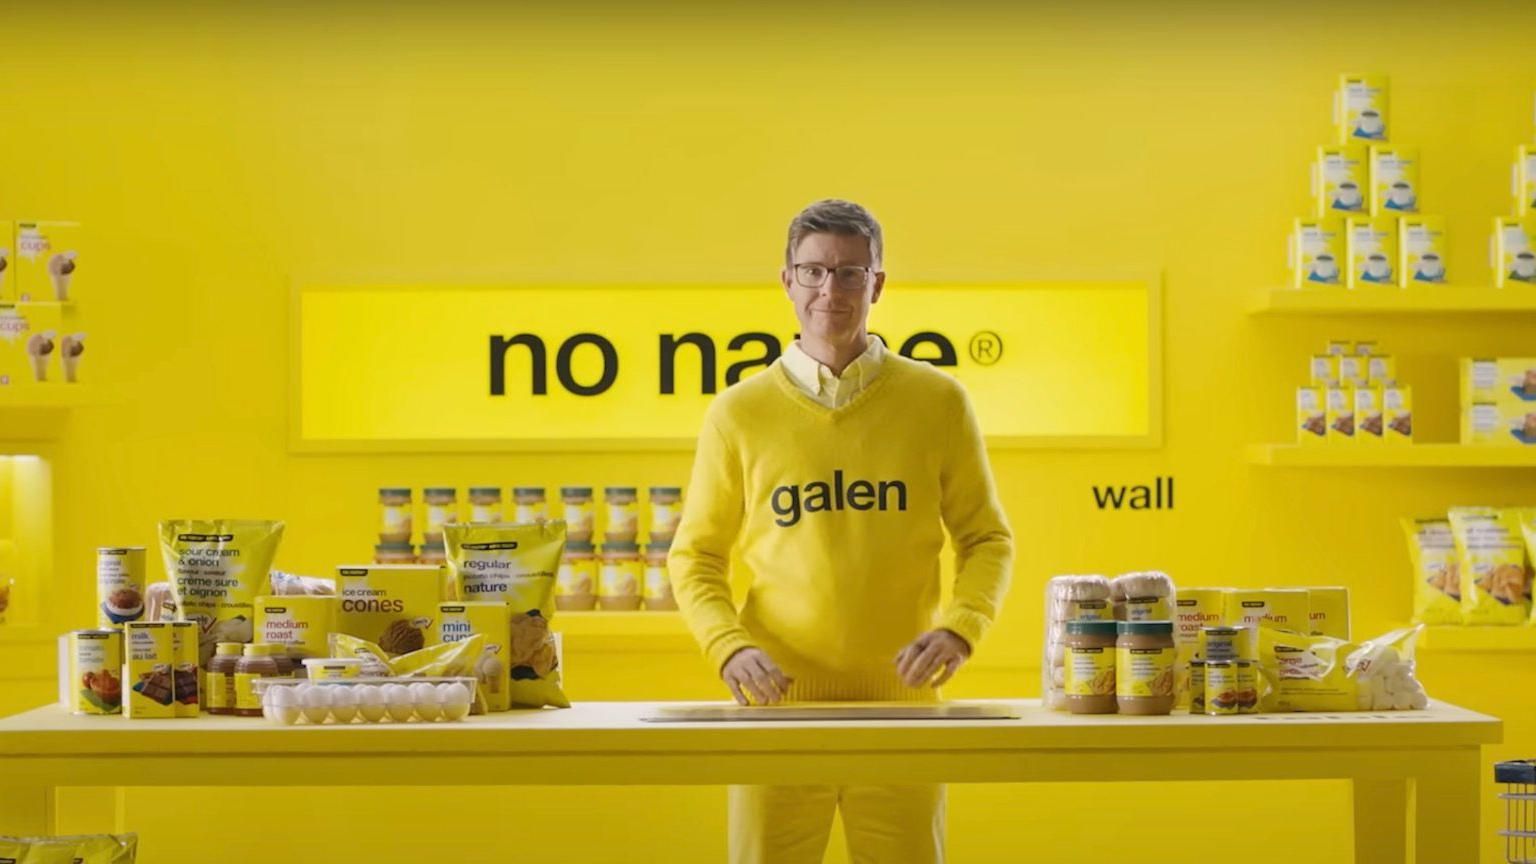 Loblaw's former president Galen Weston appearing in an advertisement for the grocer